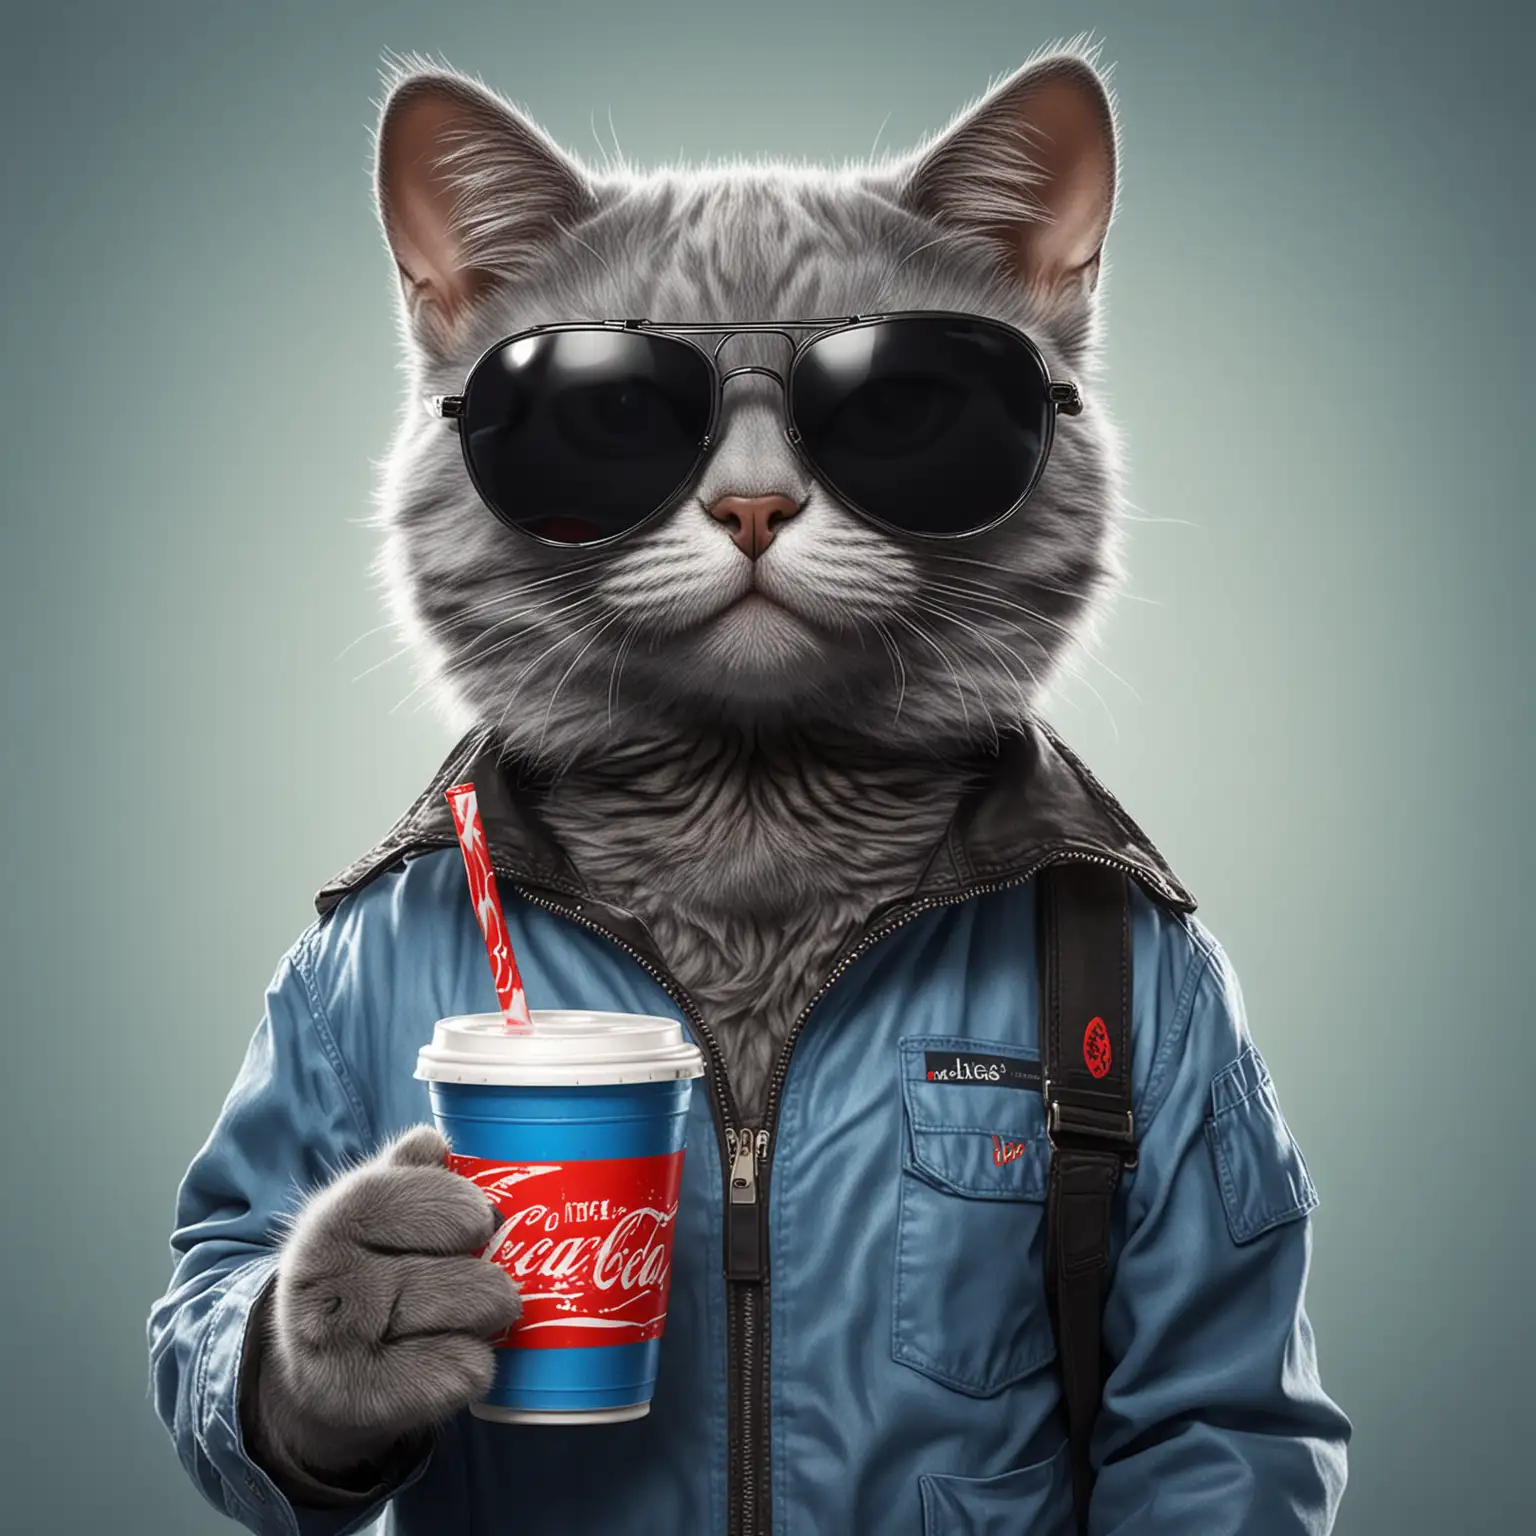 Blue-Cat-Wearing-Aviator-Sunglasses-Holding-a-Cup-of-Cola